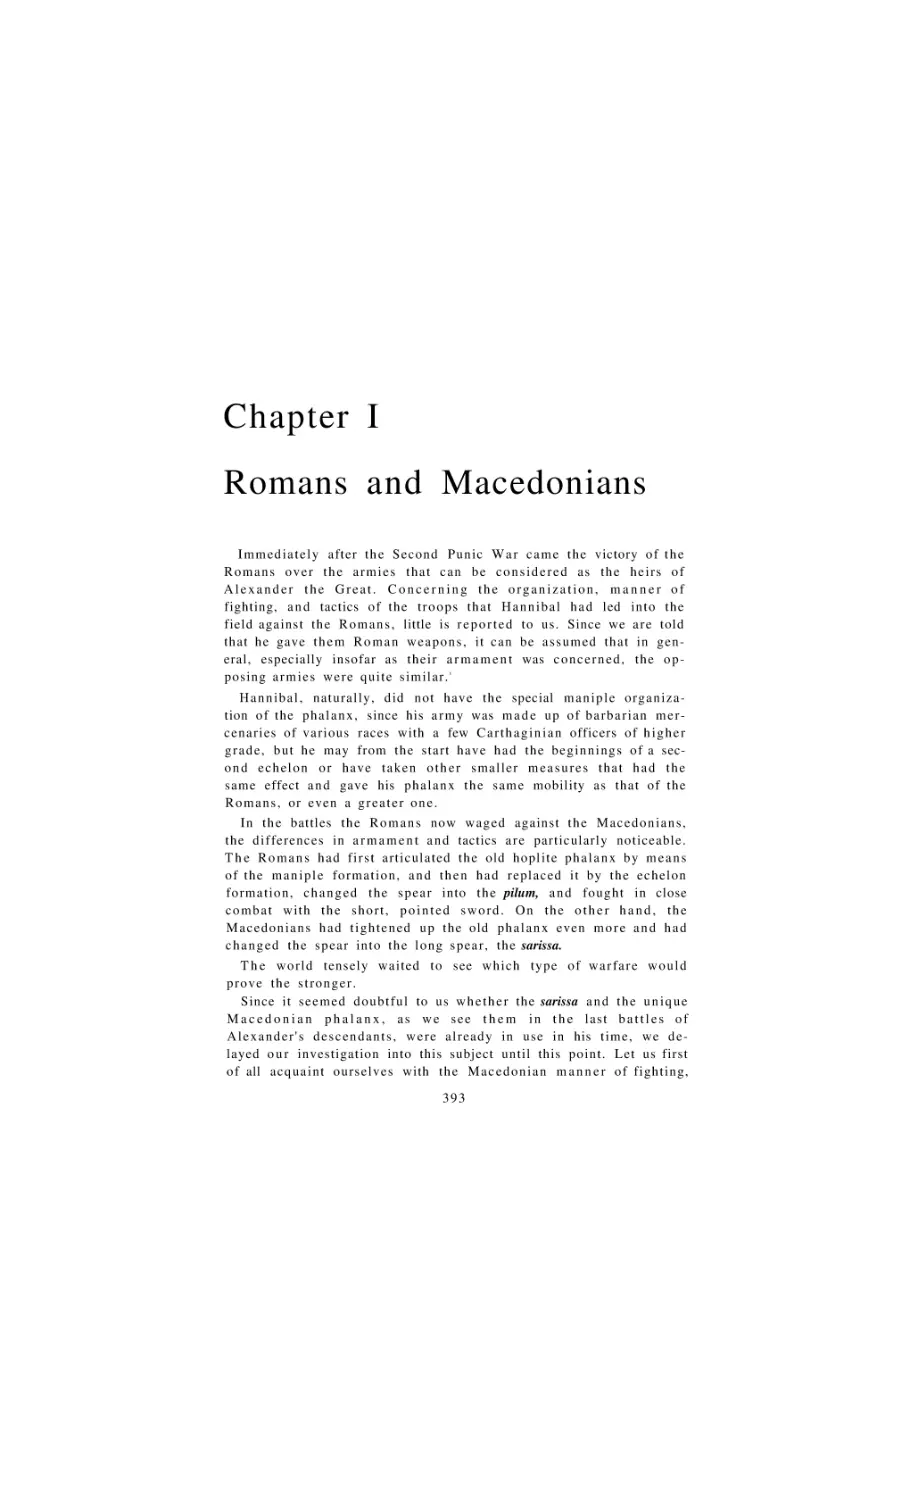 Romans and Macedonians